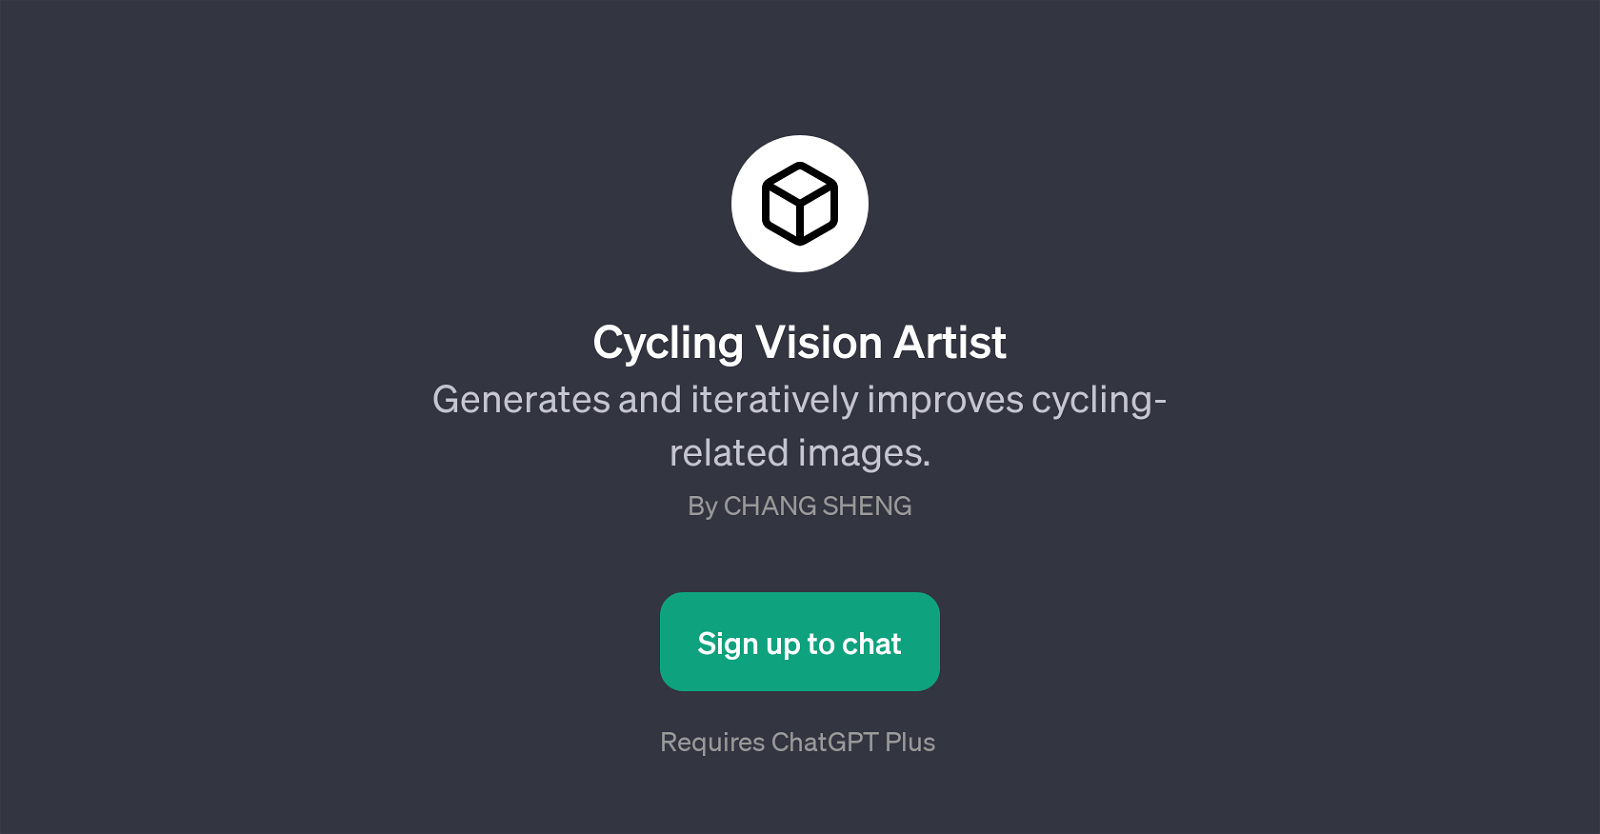 Cycling Vision Artist website